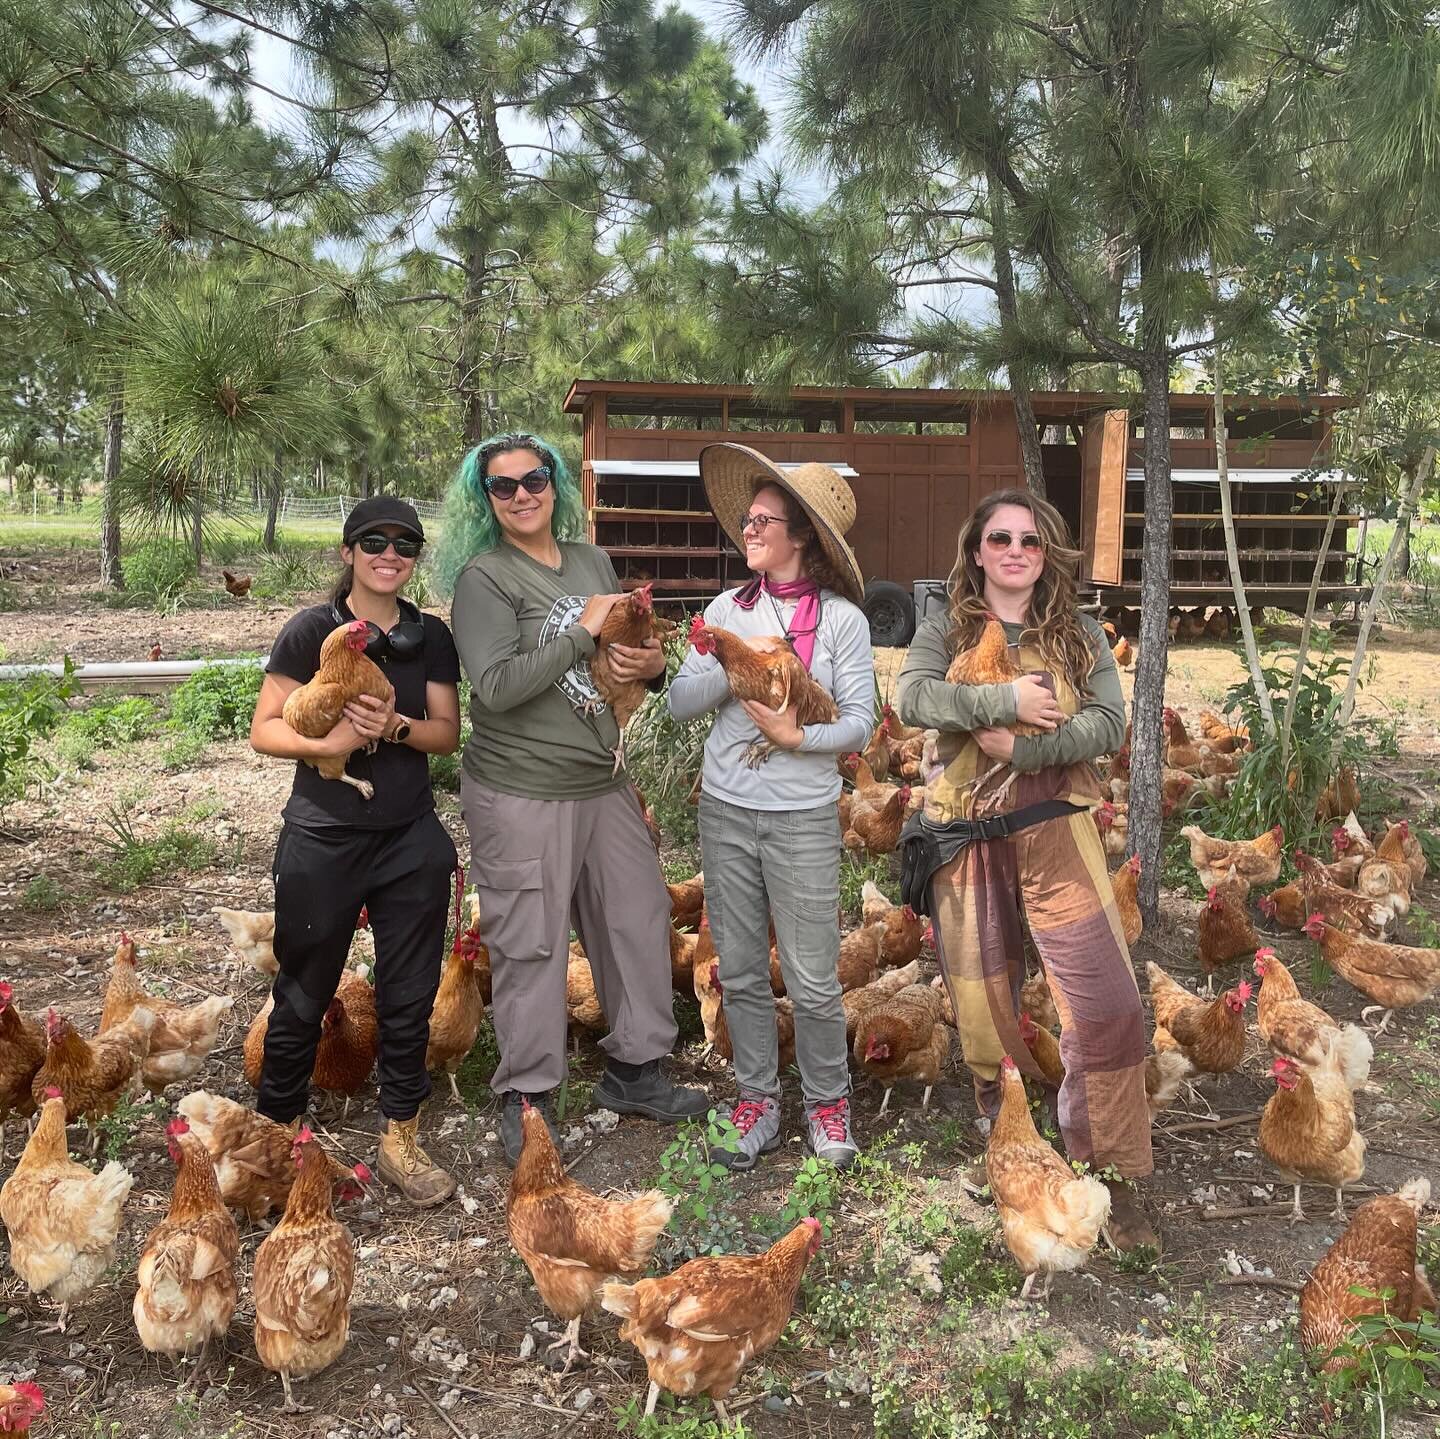 Happy International Women's Day 🌱

Thankful for the work that these women bring to the farm. Each one makes up a special part of the project.

Thank you @thaismariposa and @leilacentner3 

As we continue the mission of growing nutrient dense foods, 